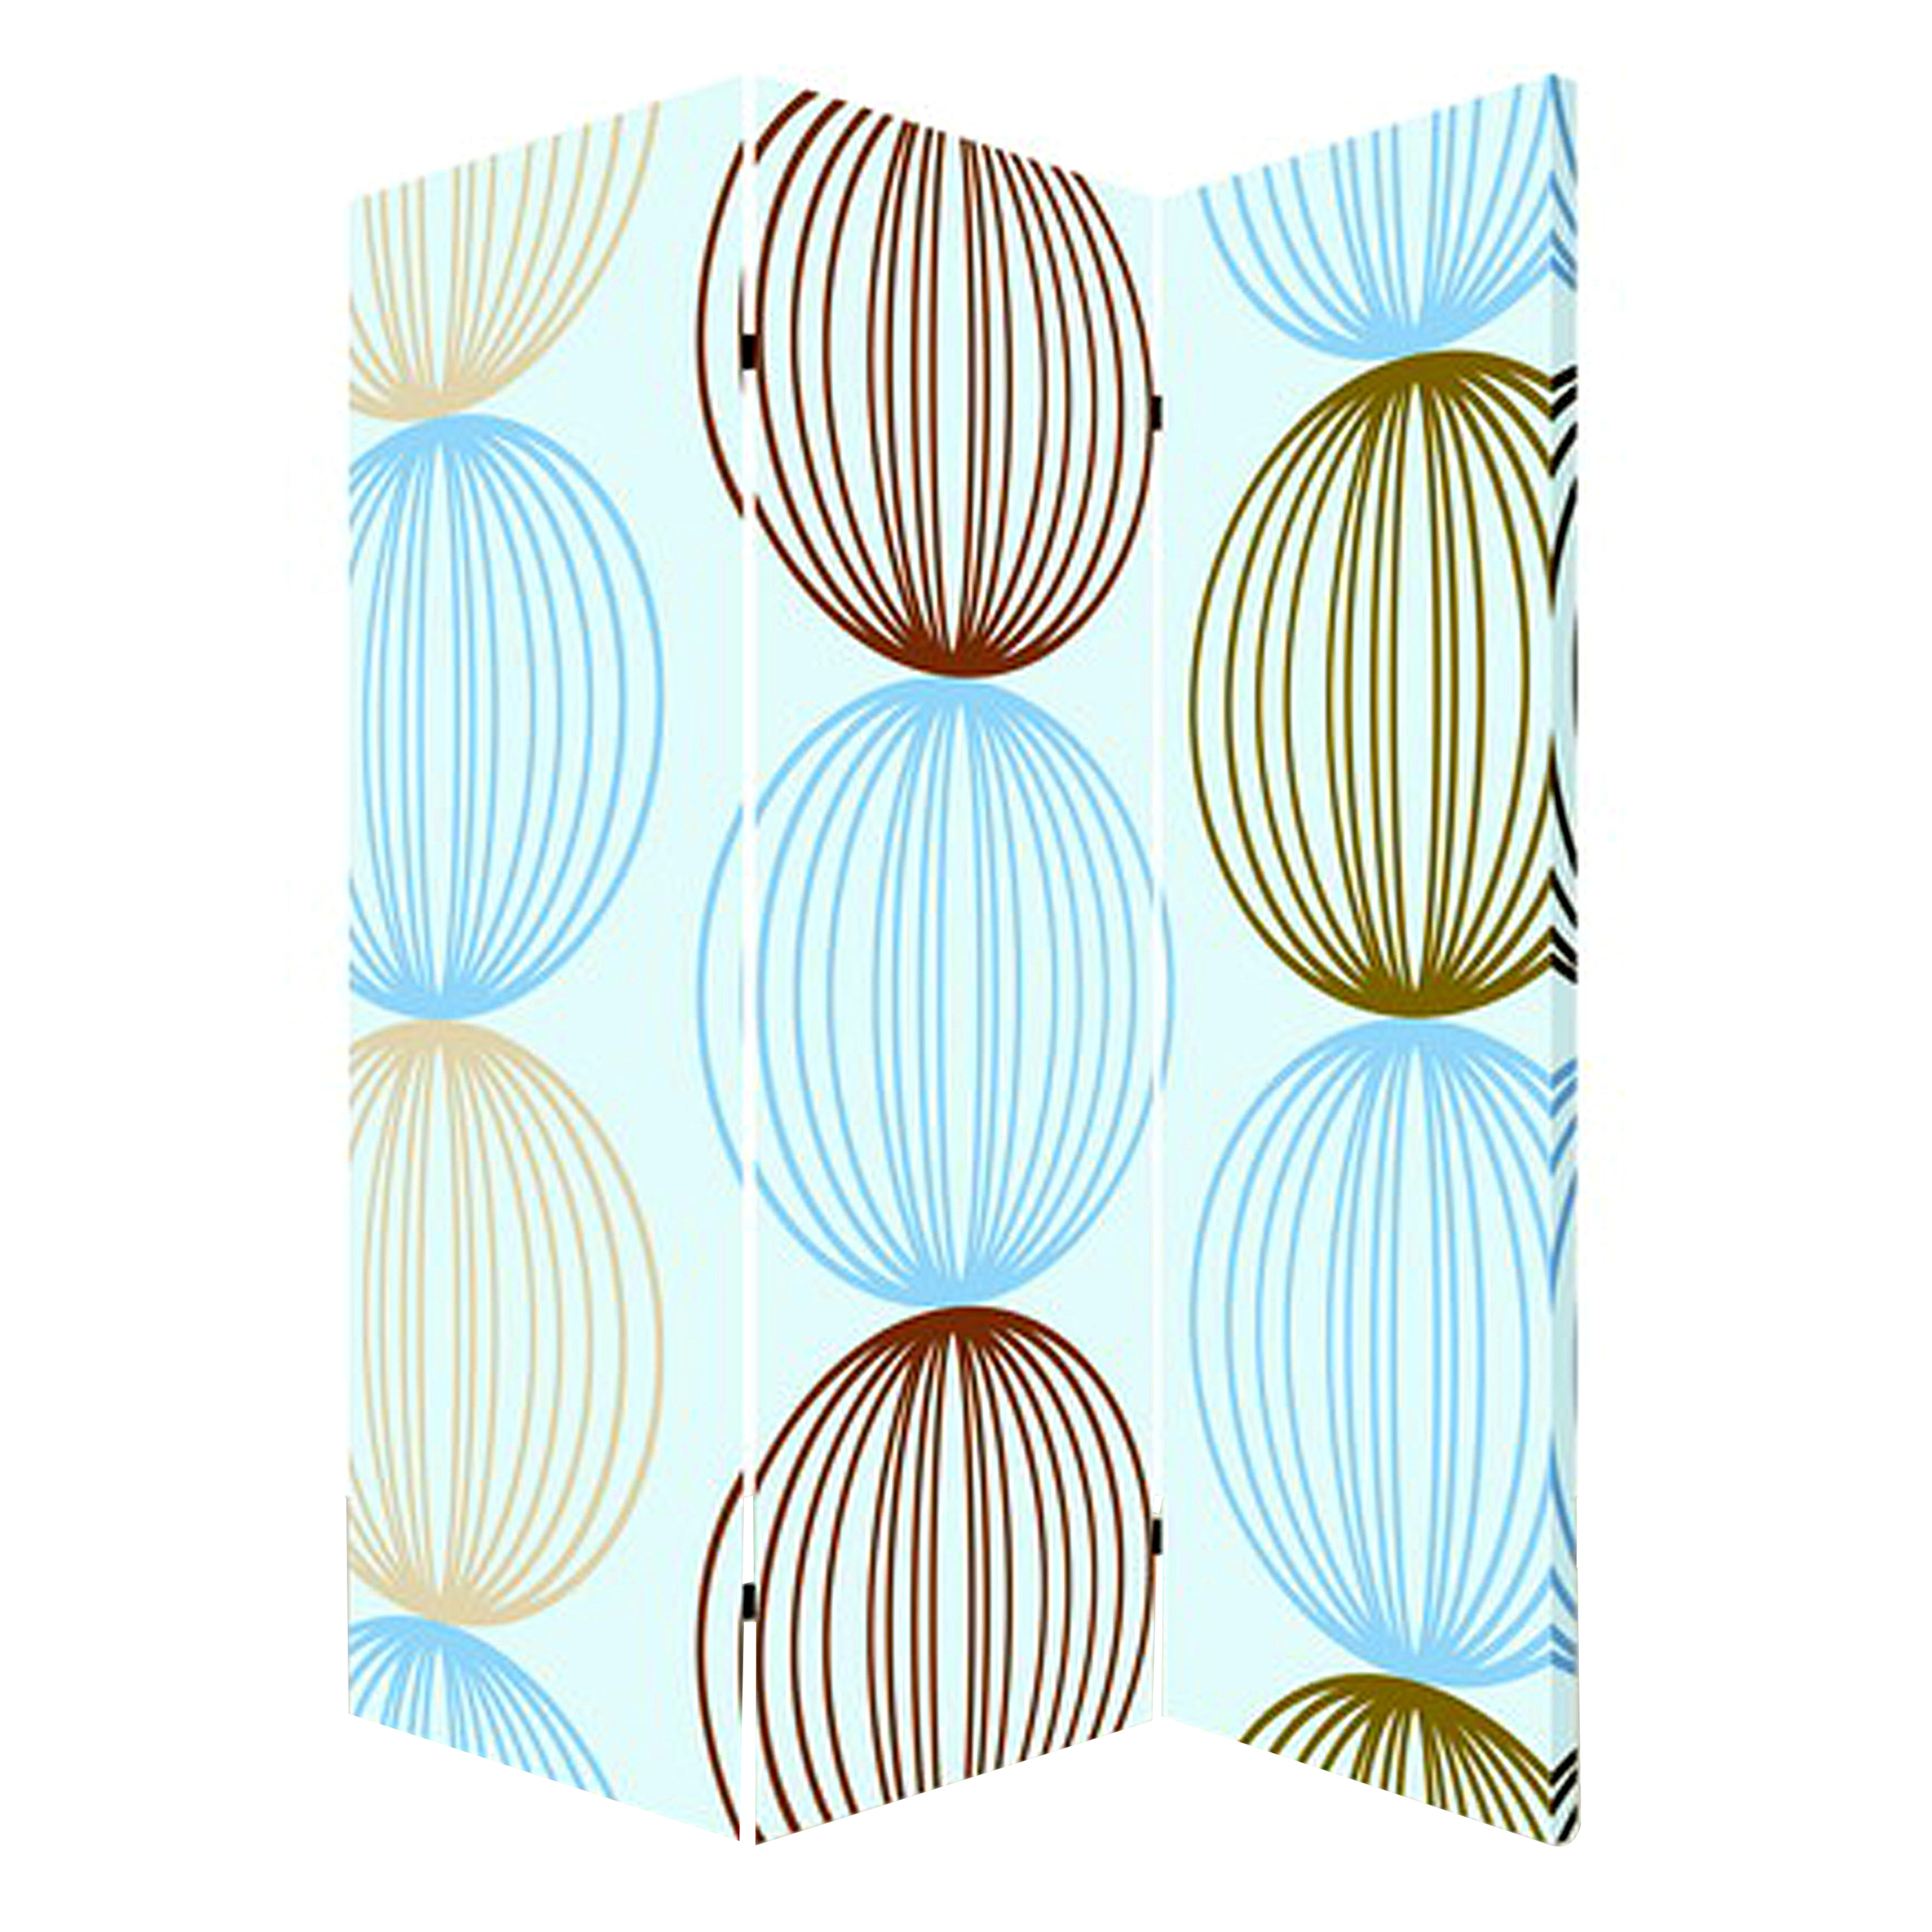 3 Panel Canvas Made Foldable Screen With Sphere Print, Multicolor- Saltoro Sherpi